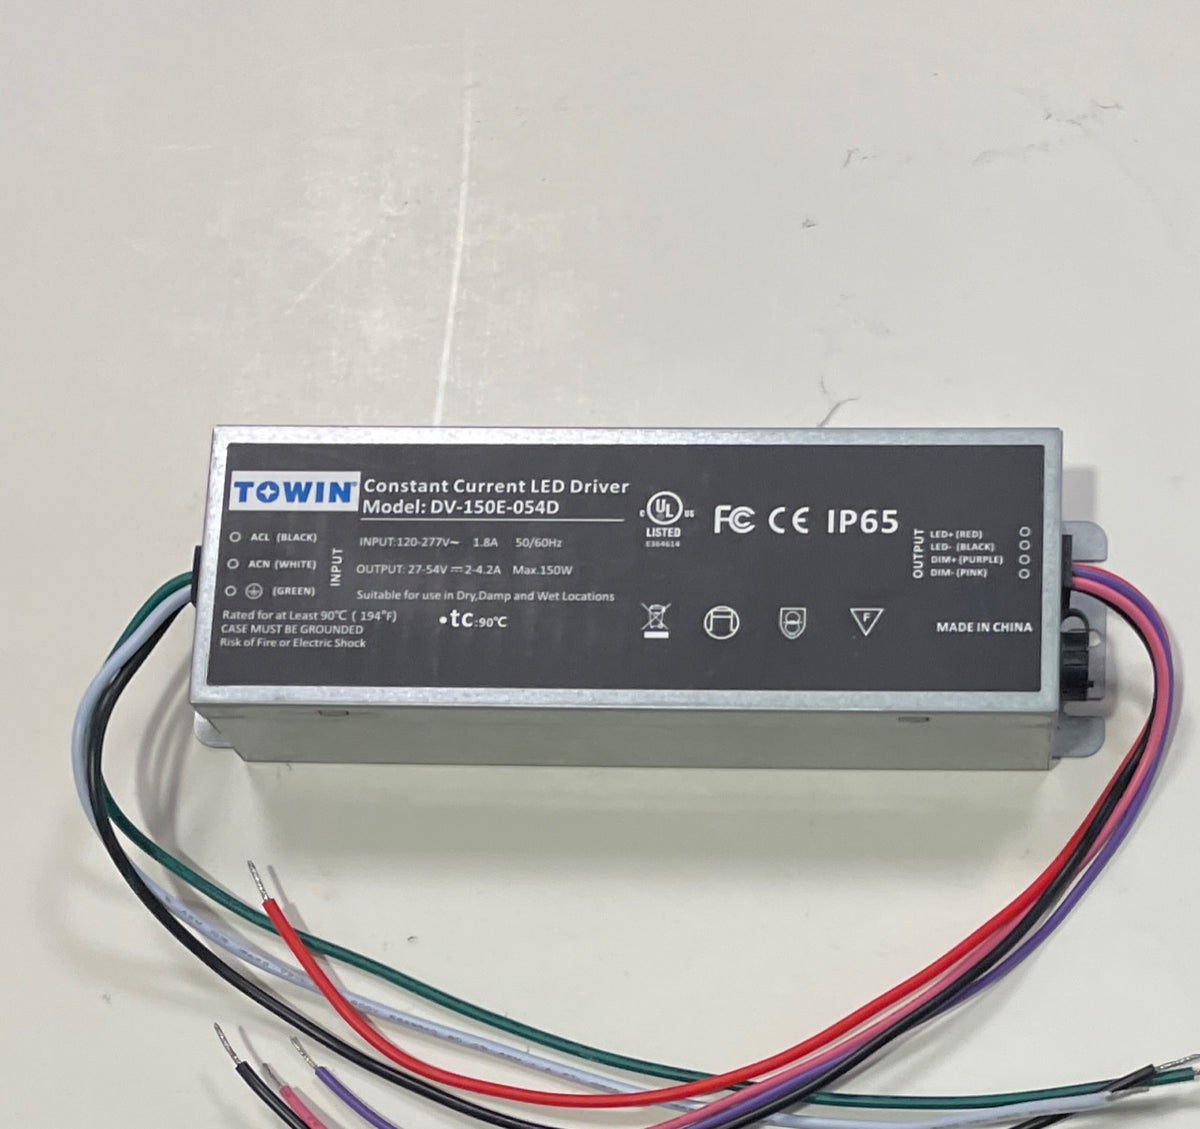 DV-150E-054D LED DRIVER replacement for DF150W-40C3800B-A